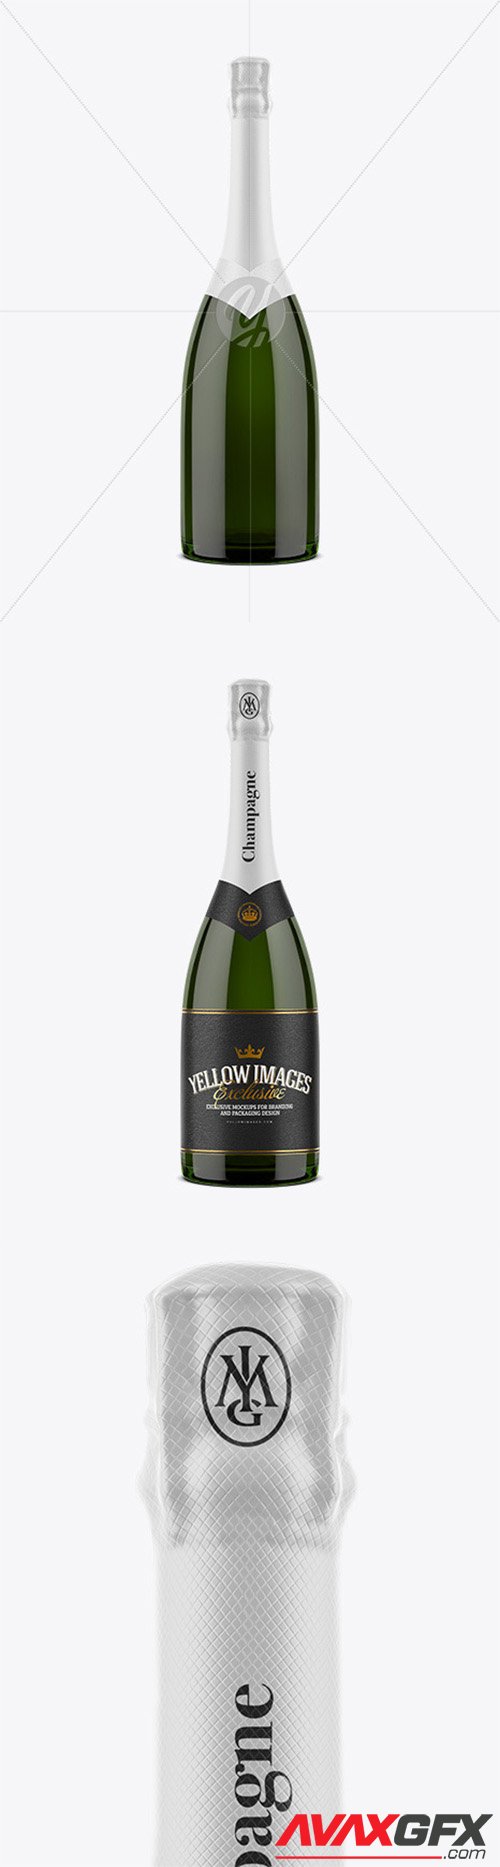 Download Champagne Bottle Mockup 52756 Avaxgfx All Downloads That You Need In One Place Graphic From Nitroflare Rapidgator PSD Mockup Templates